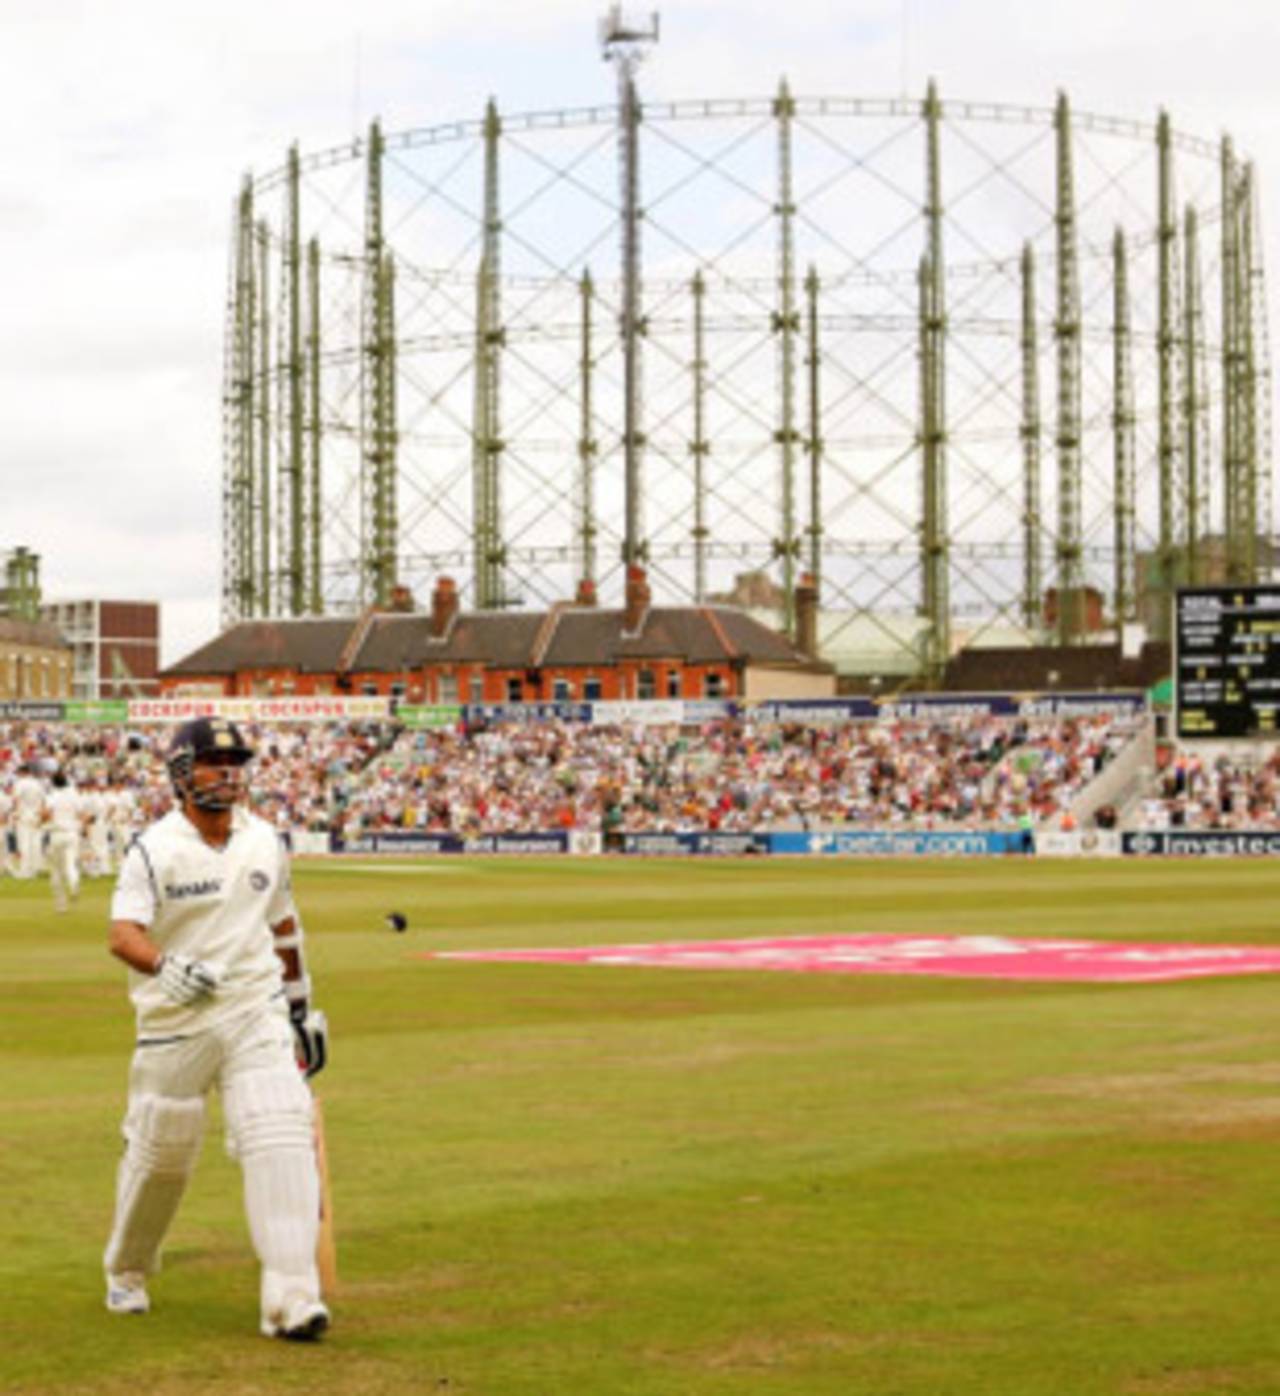 Sachin Tendulkar walks back after what could be his last Test innings in England, England v India, 3rd Test, The Oval, 4th day, August 12, 2007